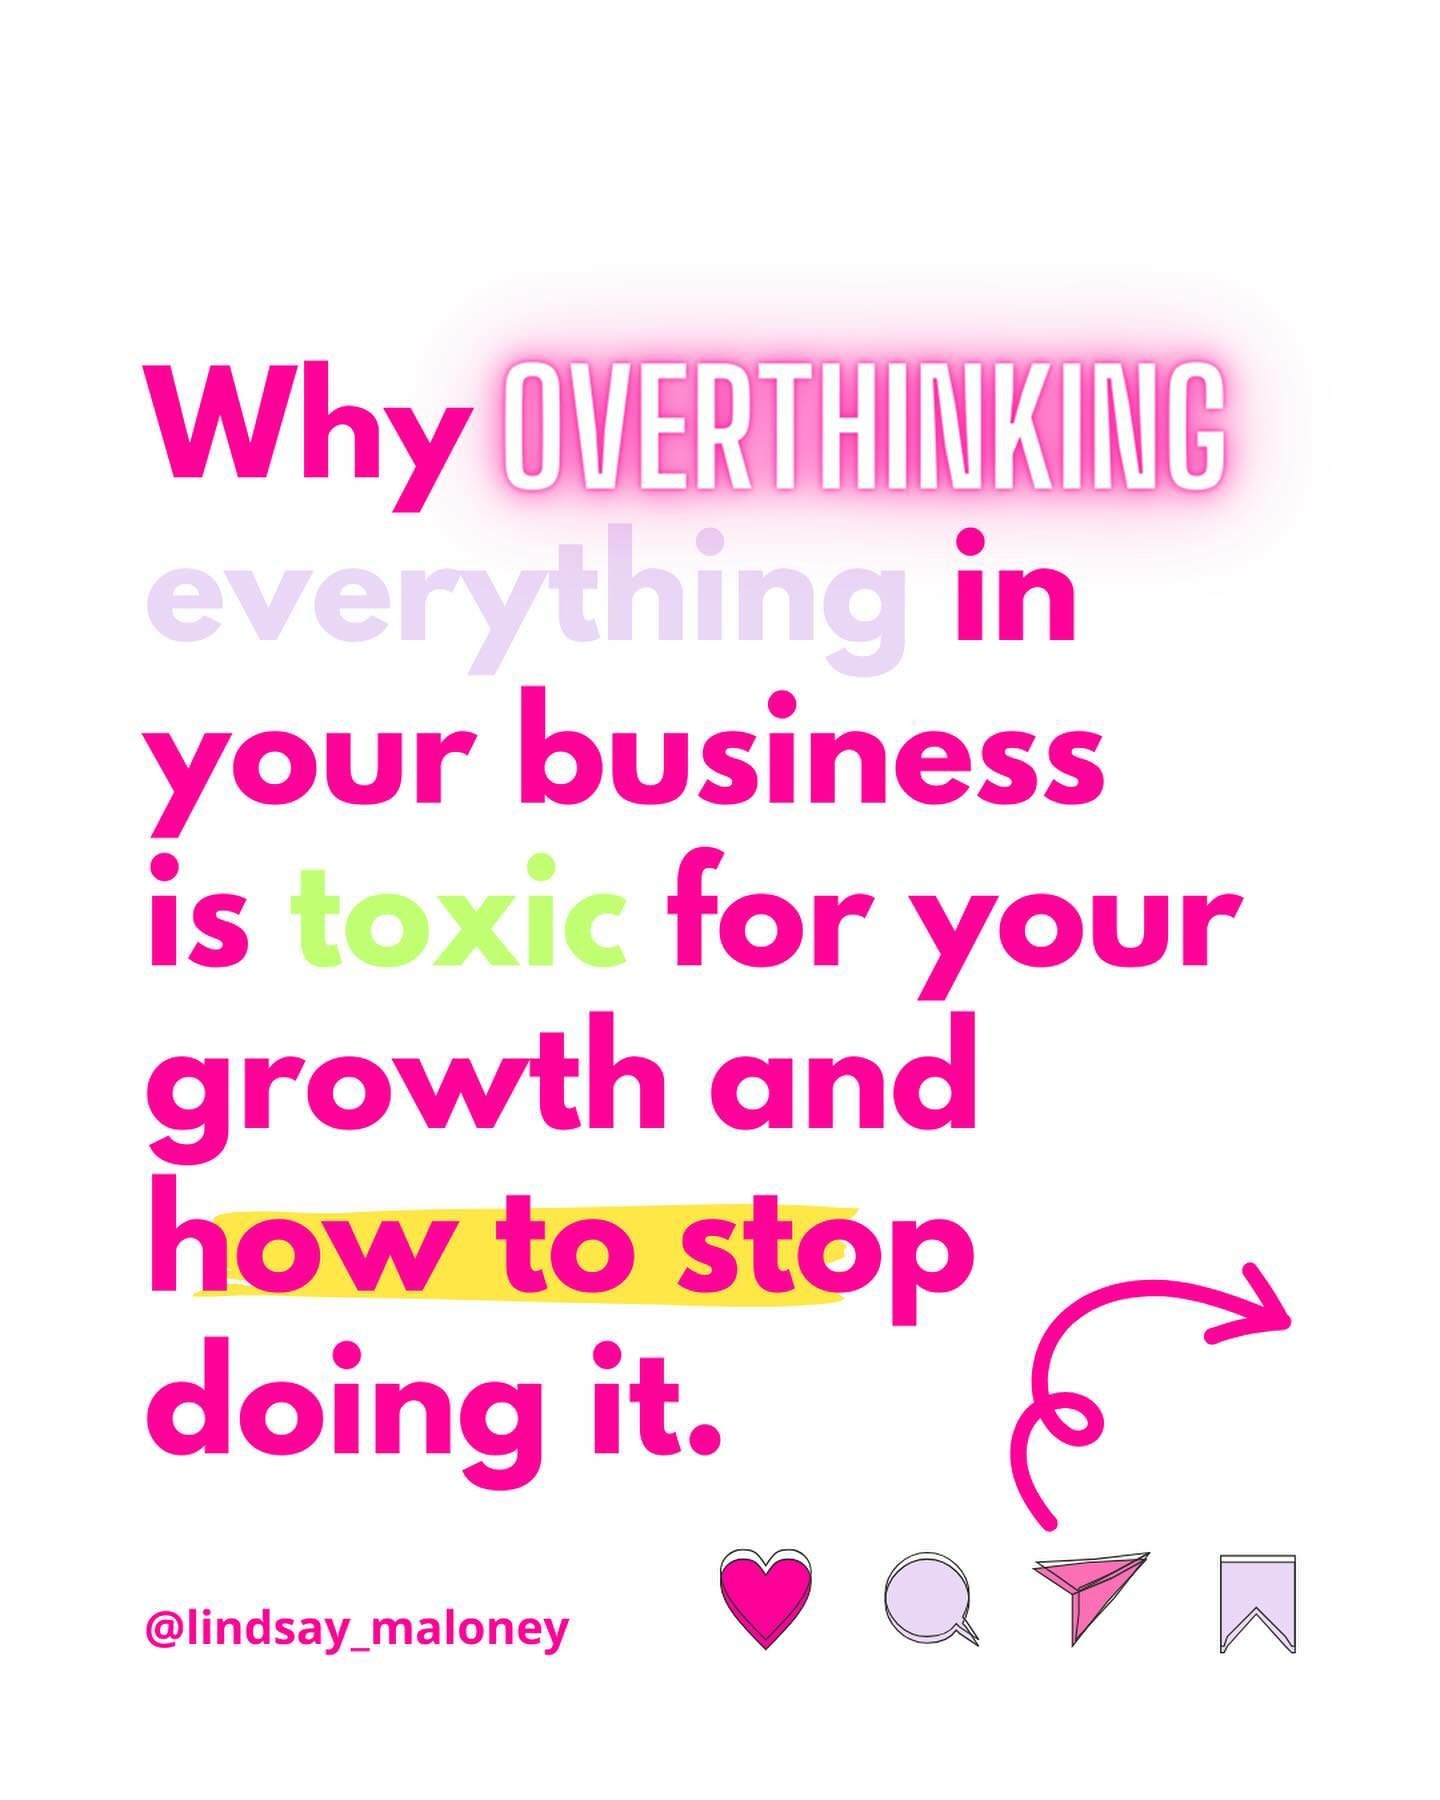 🤔❌ Things that I don&rsquo;t overthink&hellip;

❌ How much to price something.
❌ What I should post.
❌ What I should say or write.
❌ Why people aren&rsquo;t signing up.
❌ Why people are signing up lol.

👉🏻 Overthinking is something I do when I&rsq